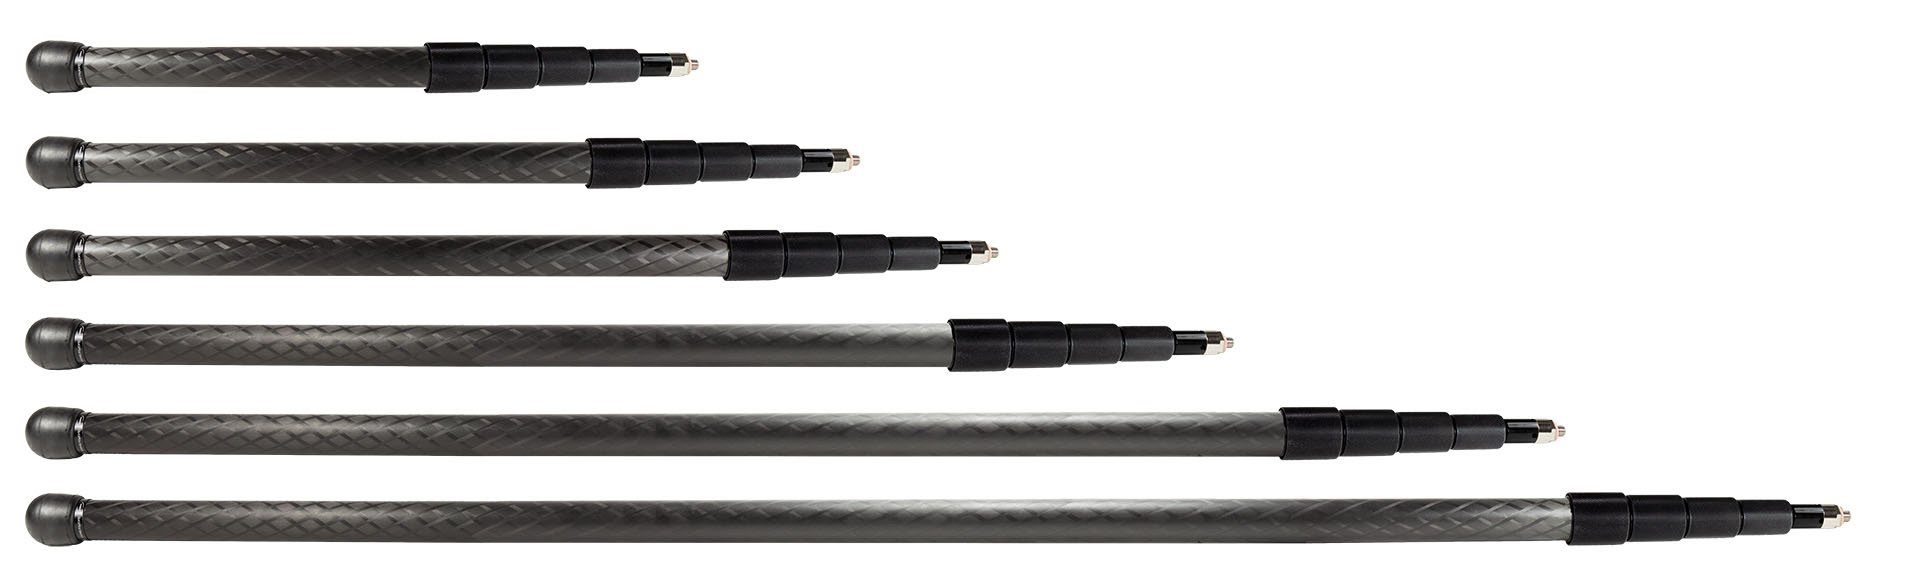 quickpole-boom-pole-series-5-all-models